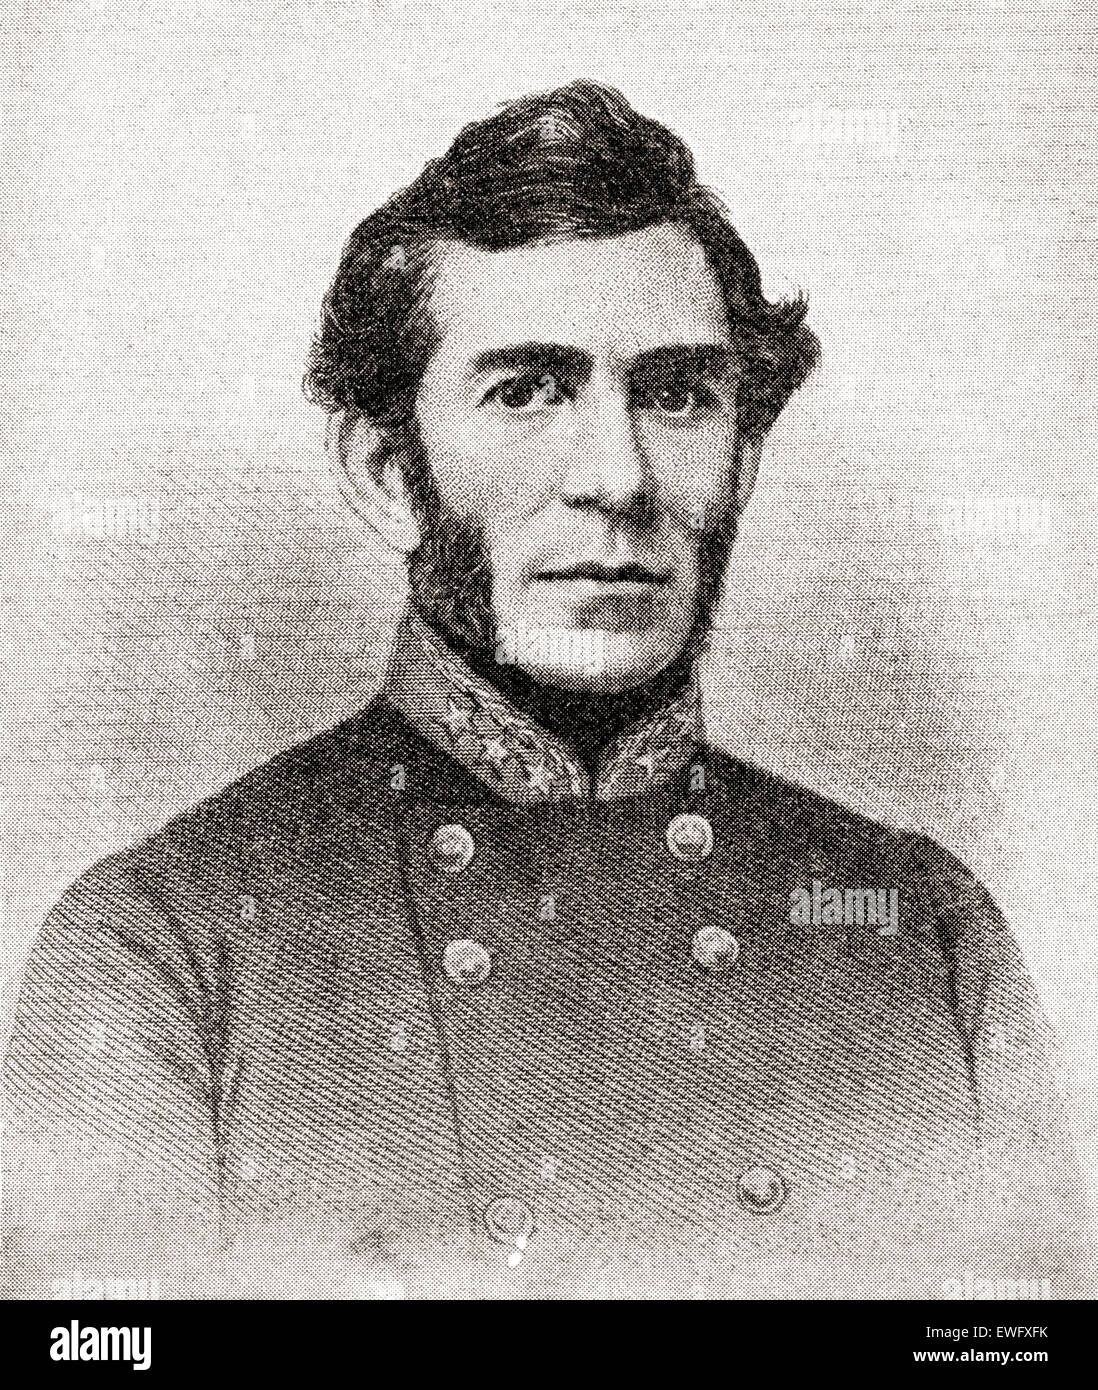 Braxton Bragg, 1817 – 1876.  Career United States Army officer, and general in the Confederate States Army during the American Civil War. Stock Photo